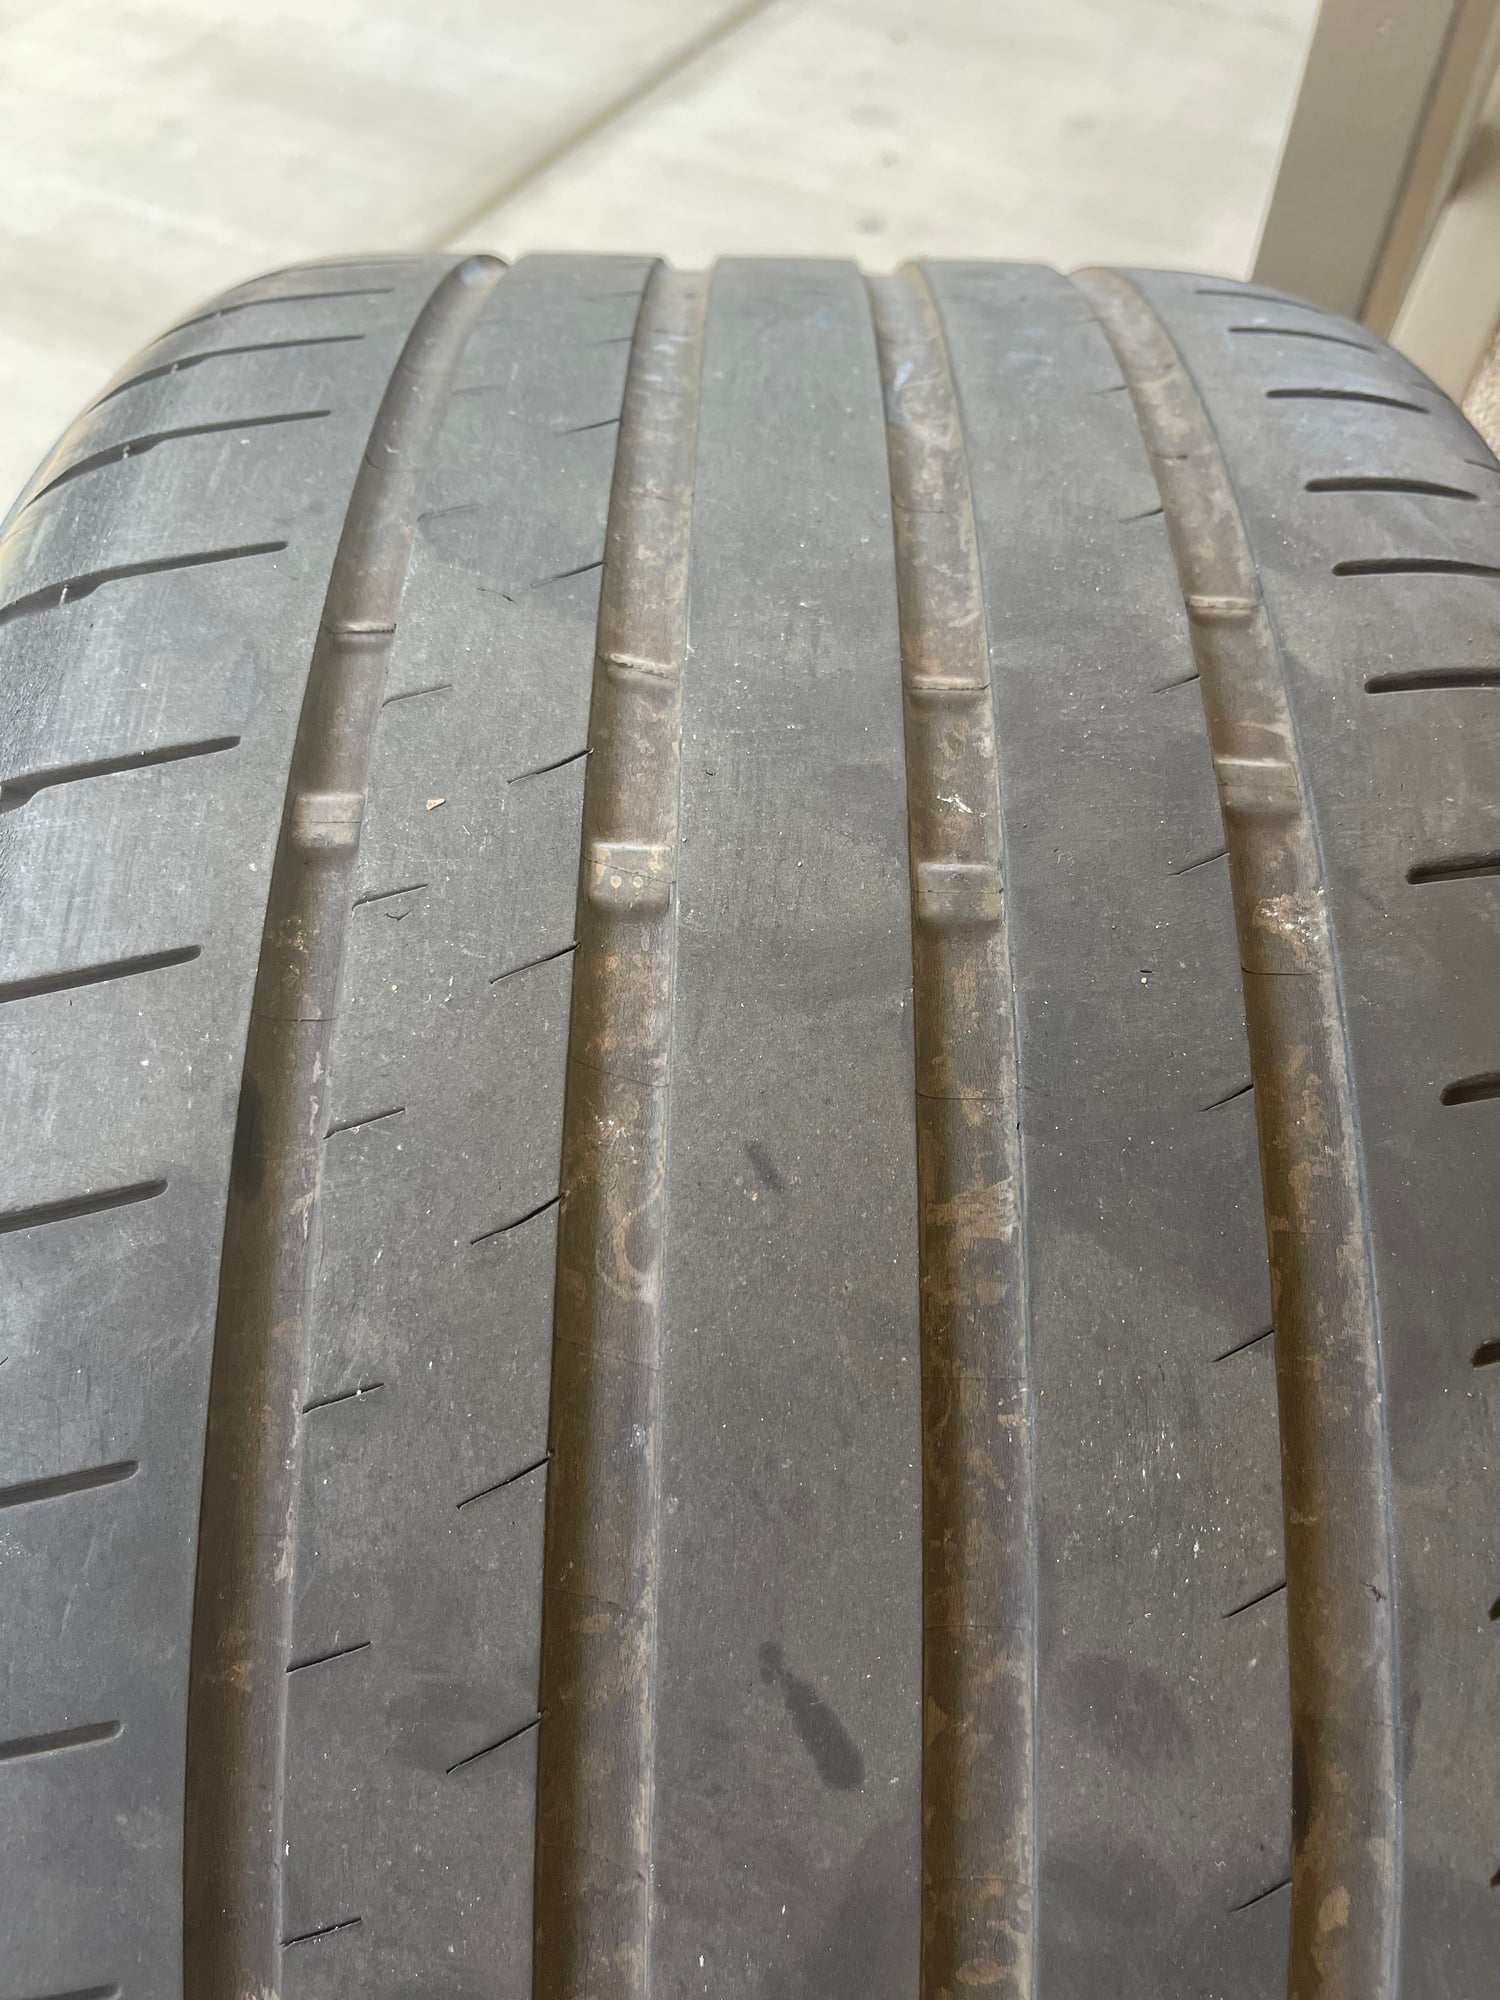 Wheels and Tires/Axles - 295/30/20 & 265/35/30 used tires - Used - 2018 to 2021 Mercedes-Benz E63 AMG S - Irvine, CA 92612, United States